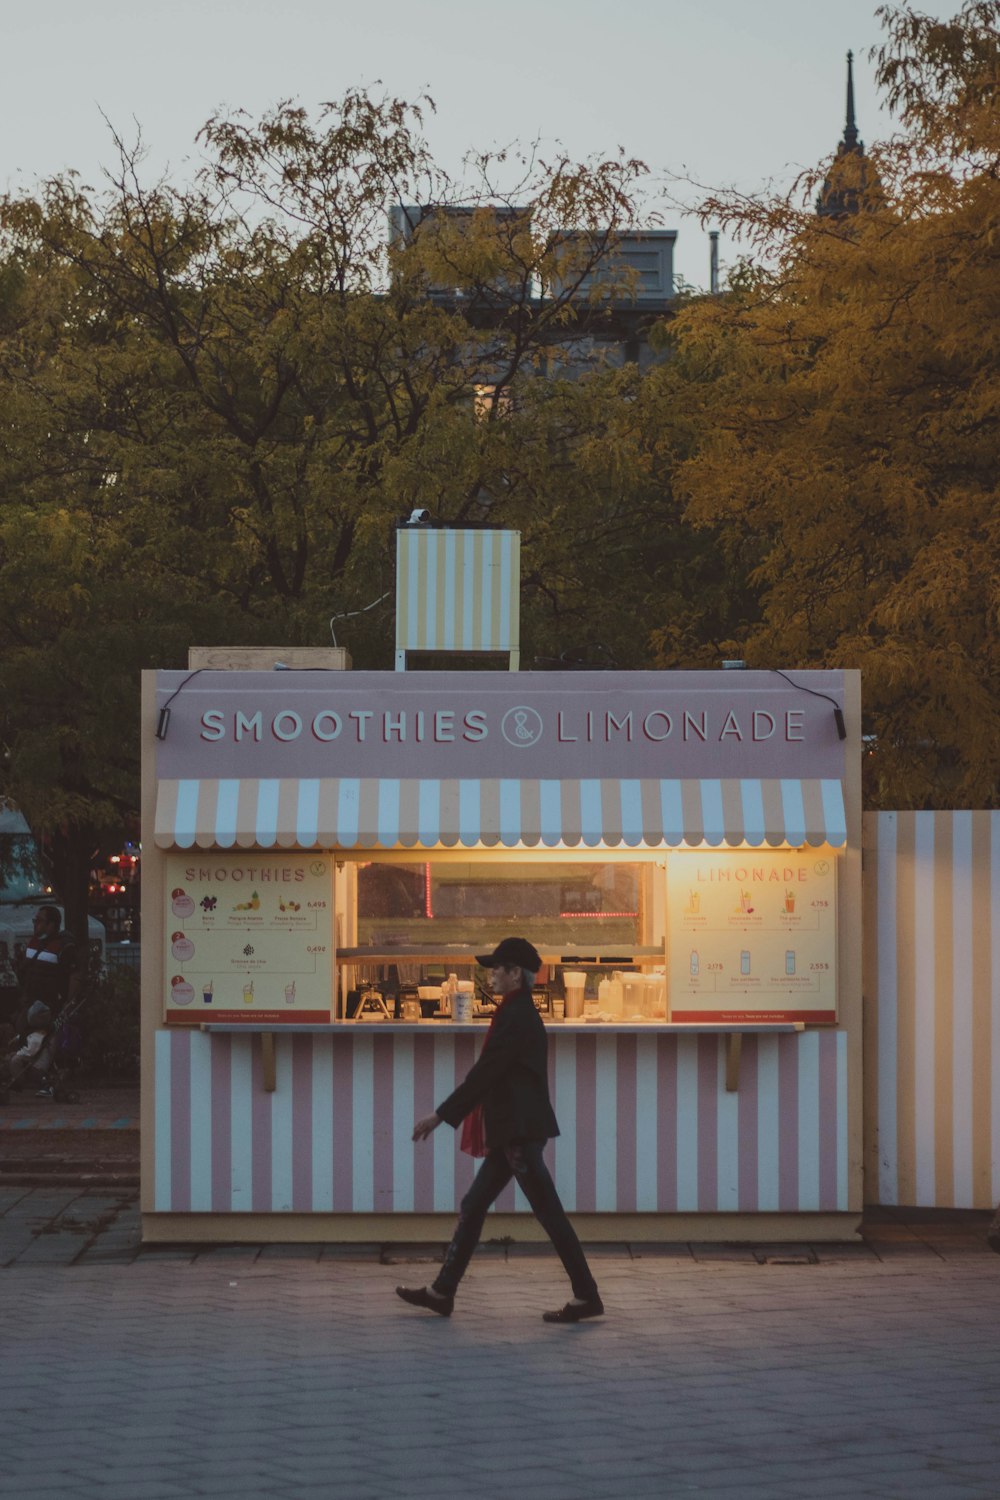 a person walking past a small food stand